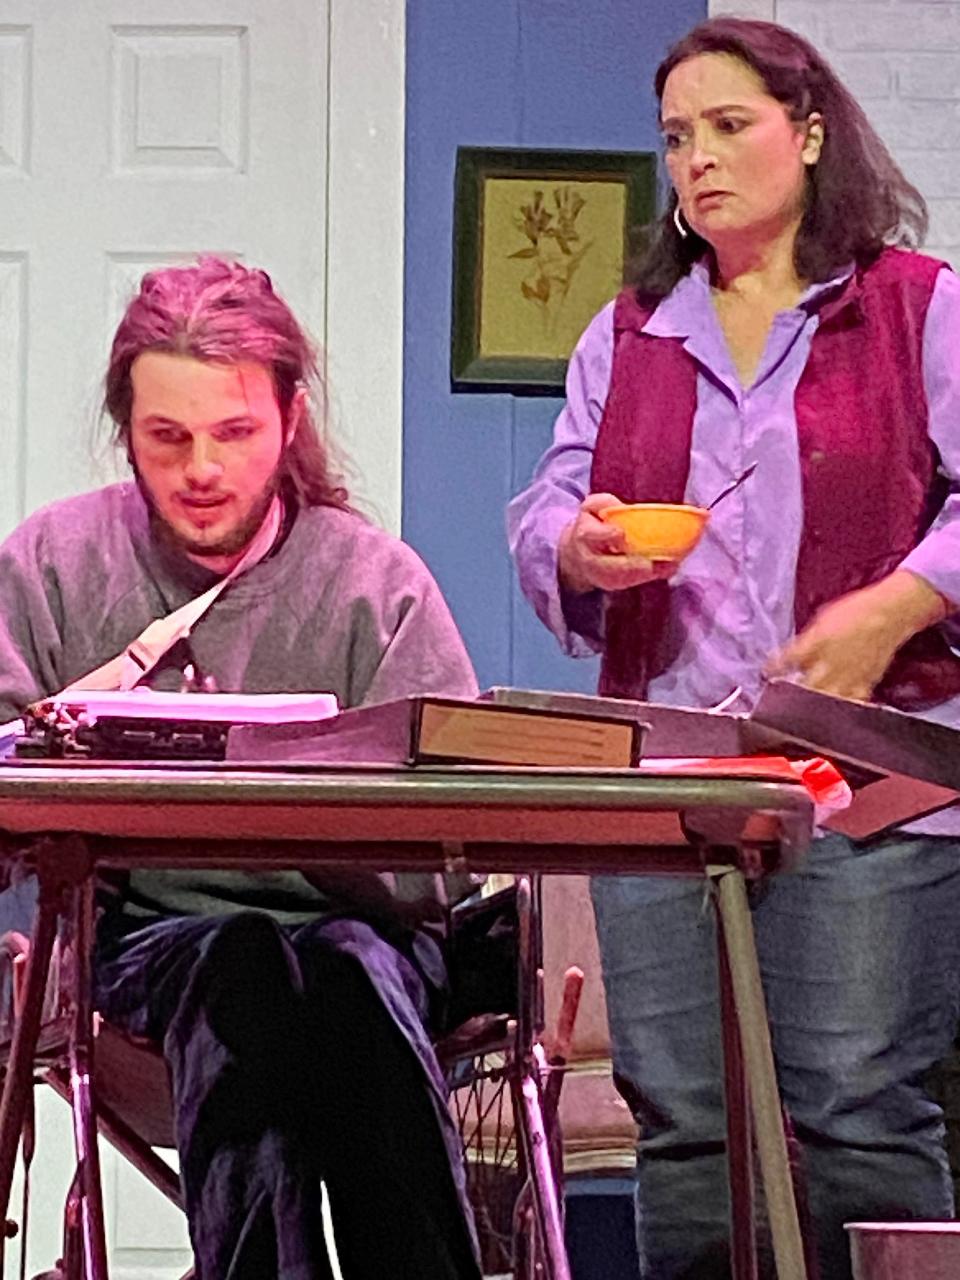 Ian Johnnson is Paul Sheldon and Melissa Crow is Annie Wilkes in a collaborative production of Stephen King's "Misery" by Actors Community Playhouse of Anniston and Theatre of Gadsden. There will be performances June 2 and 3 at the Ritz Theatre in Alabama City.